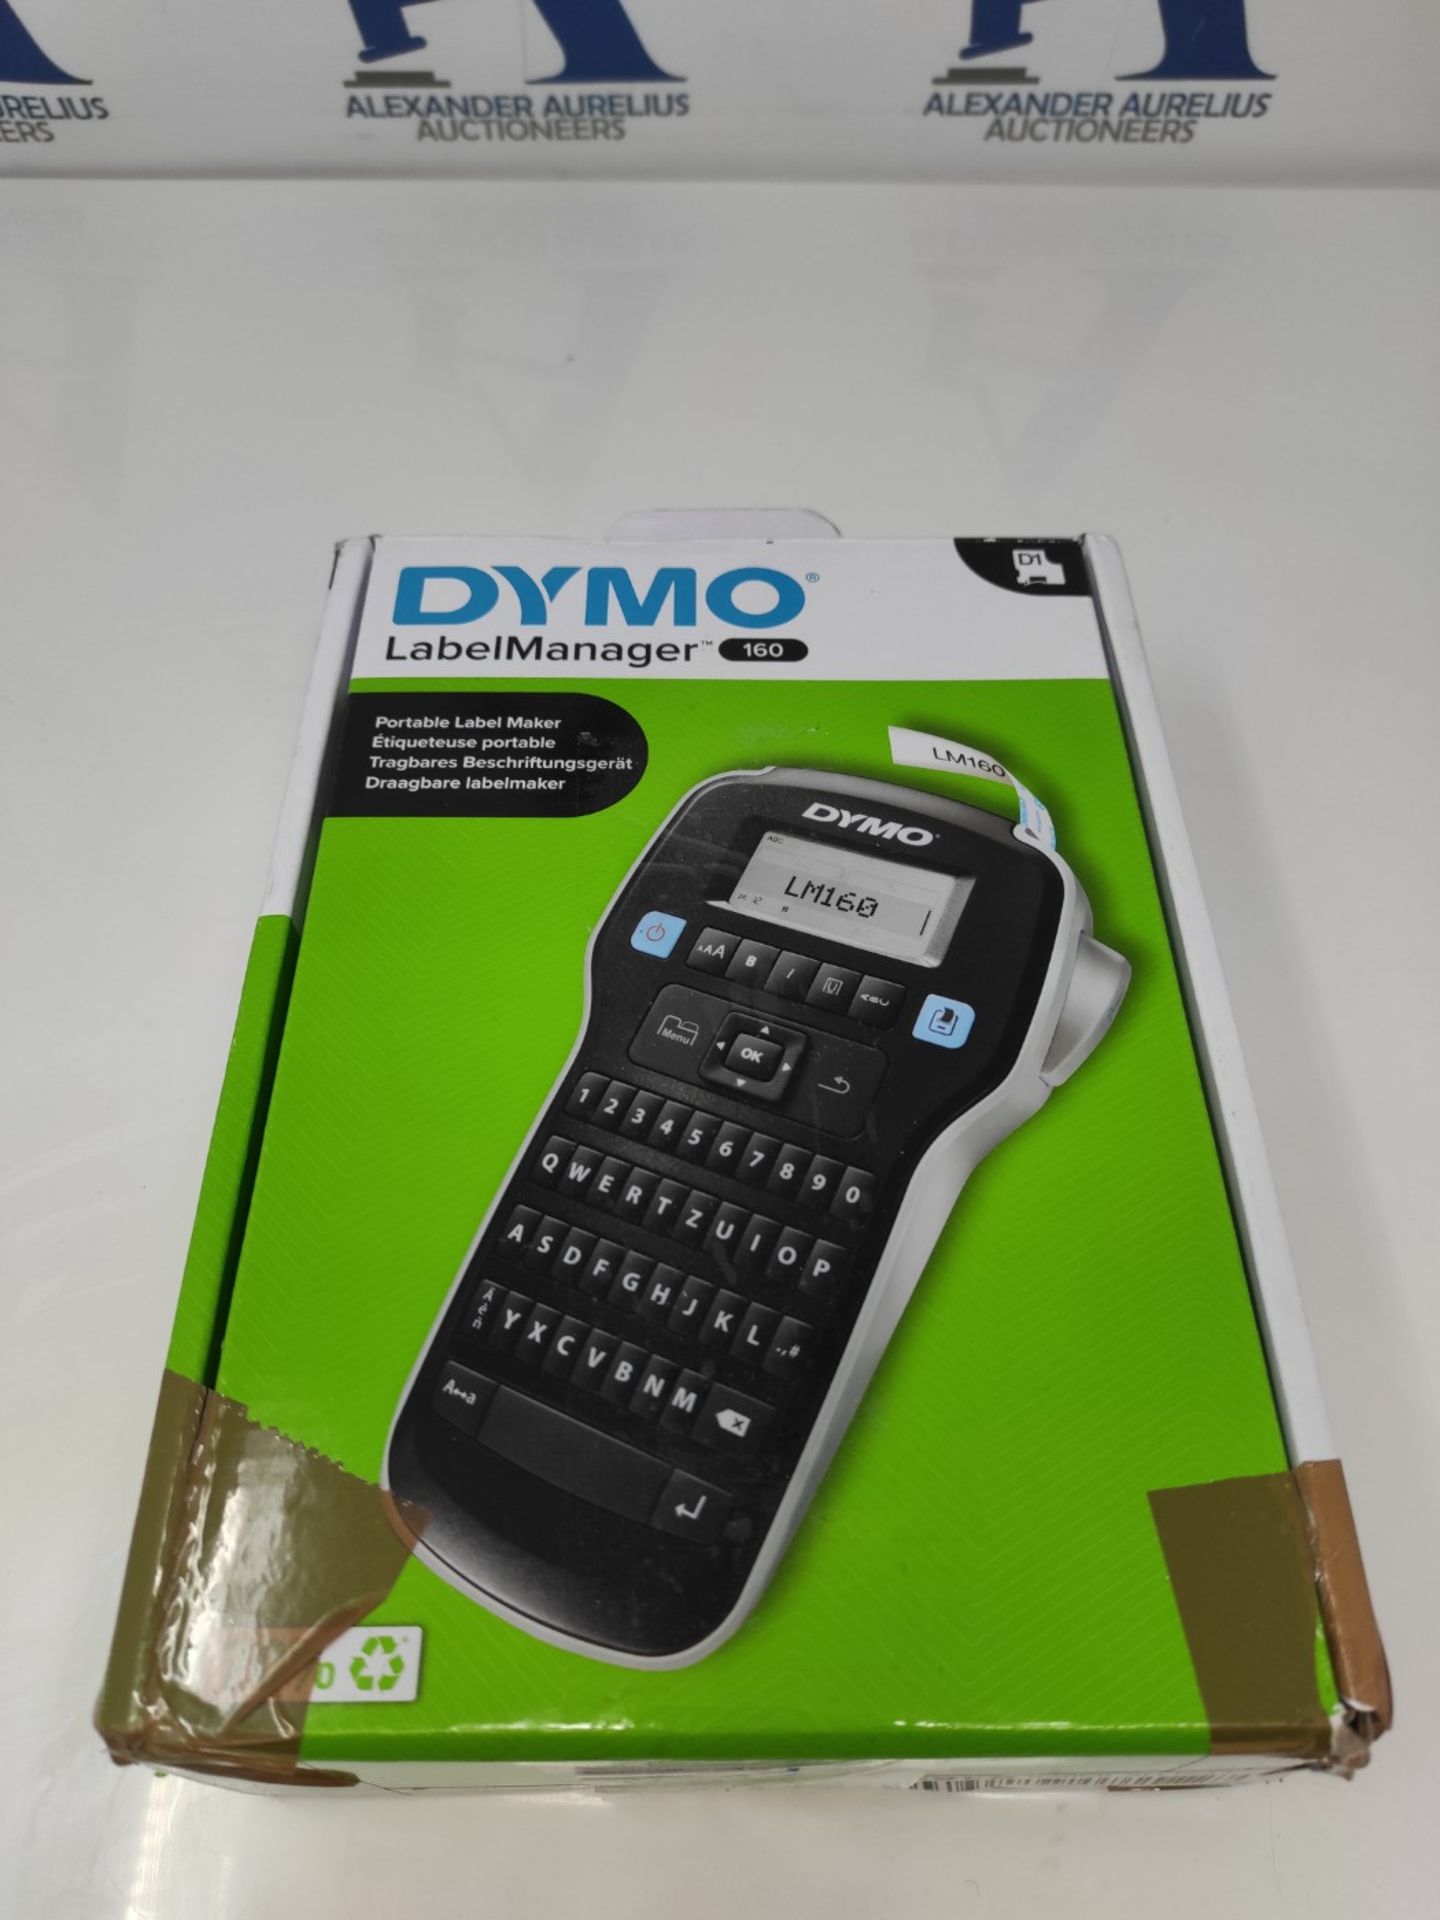 DYMO LabelManager 160 Portable Labeling Device | Labeling device with QWERTZ keyboard - Image 2 of 6